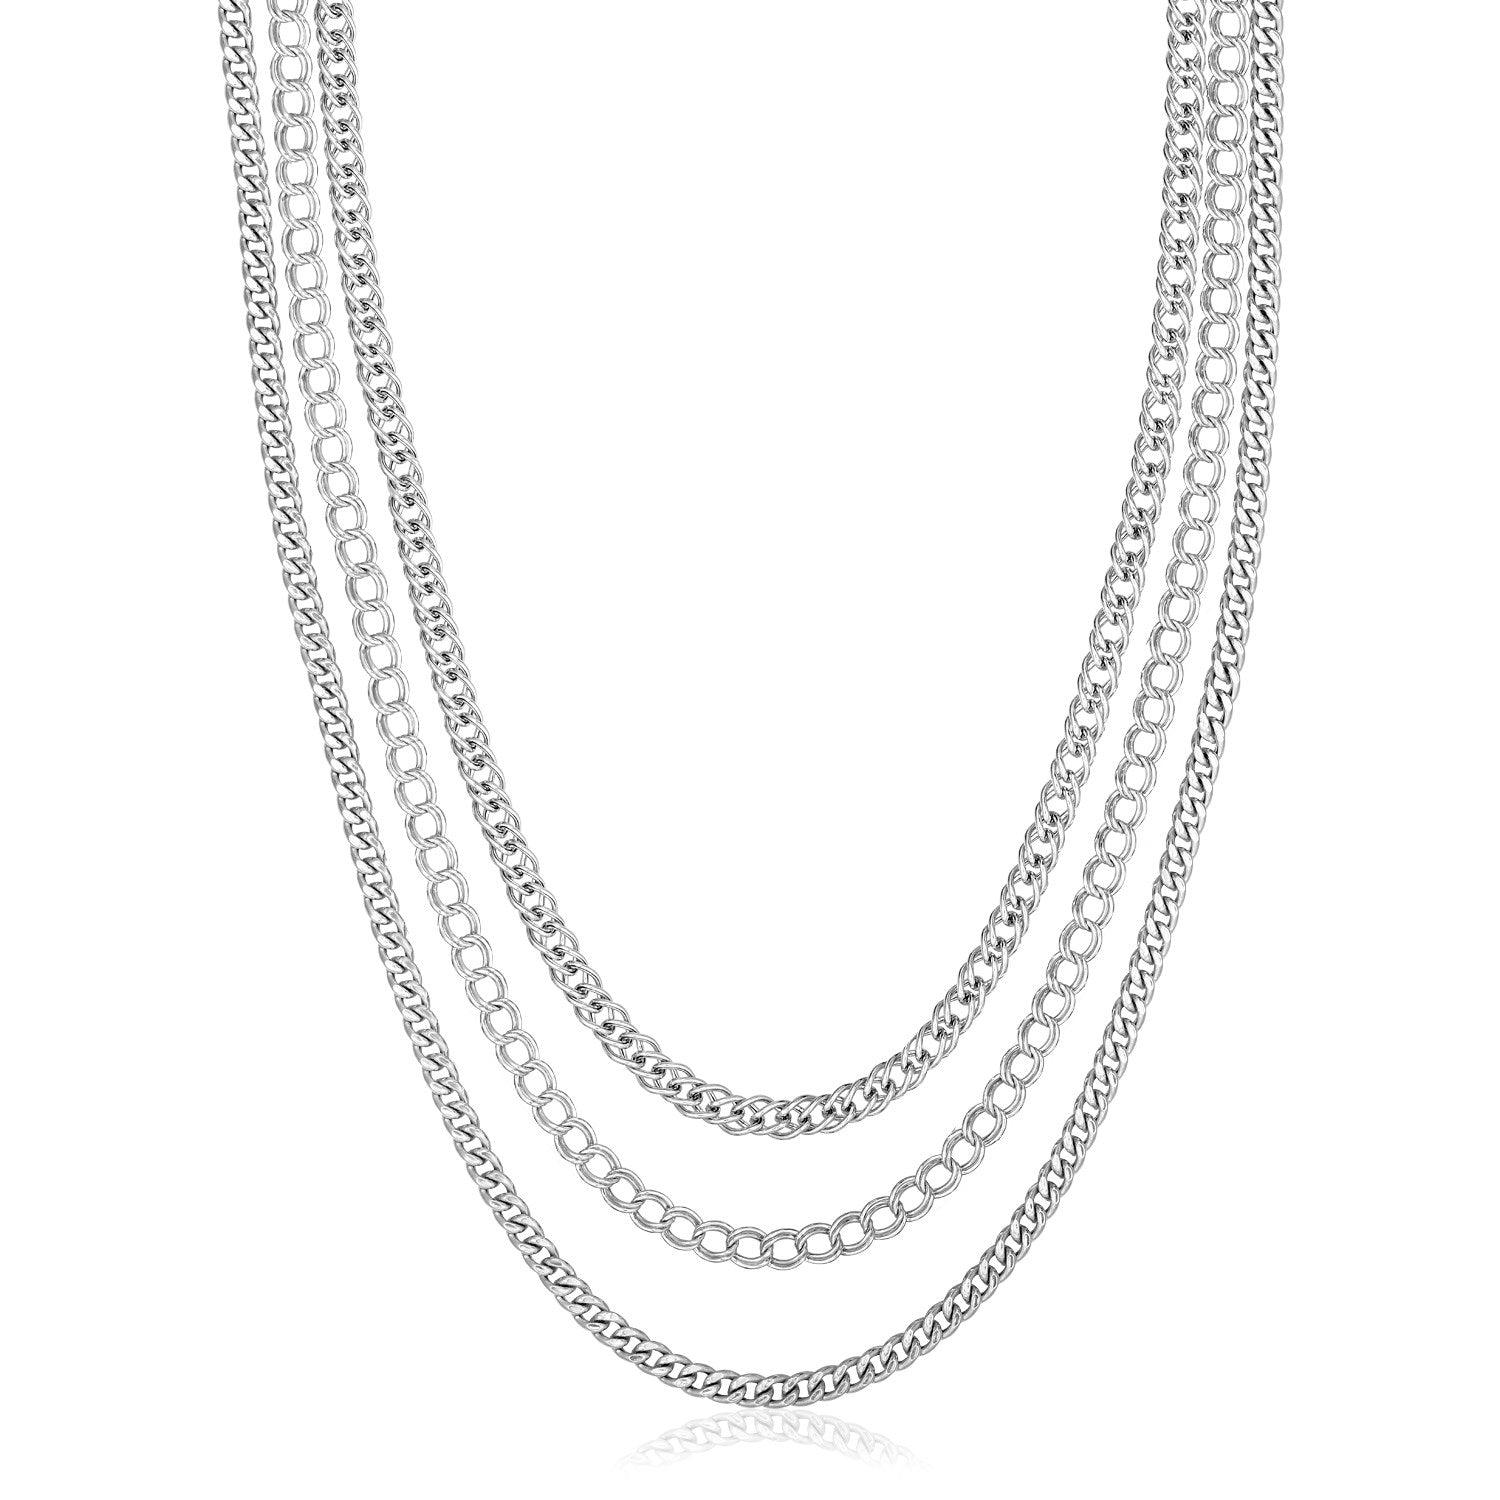 Sterling Silver 18 inch Three Strand Multiple Link Necklace freeshipping - Higher Class Elegance